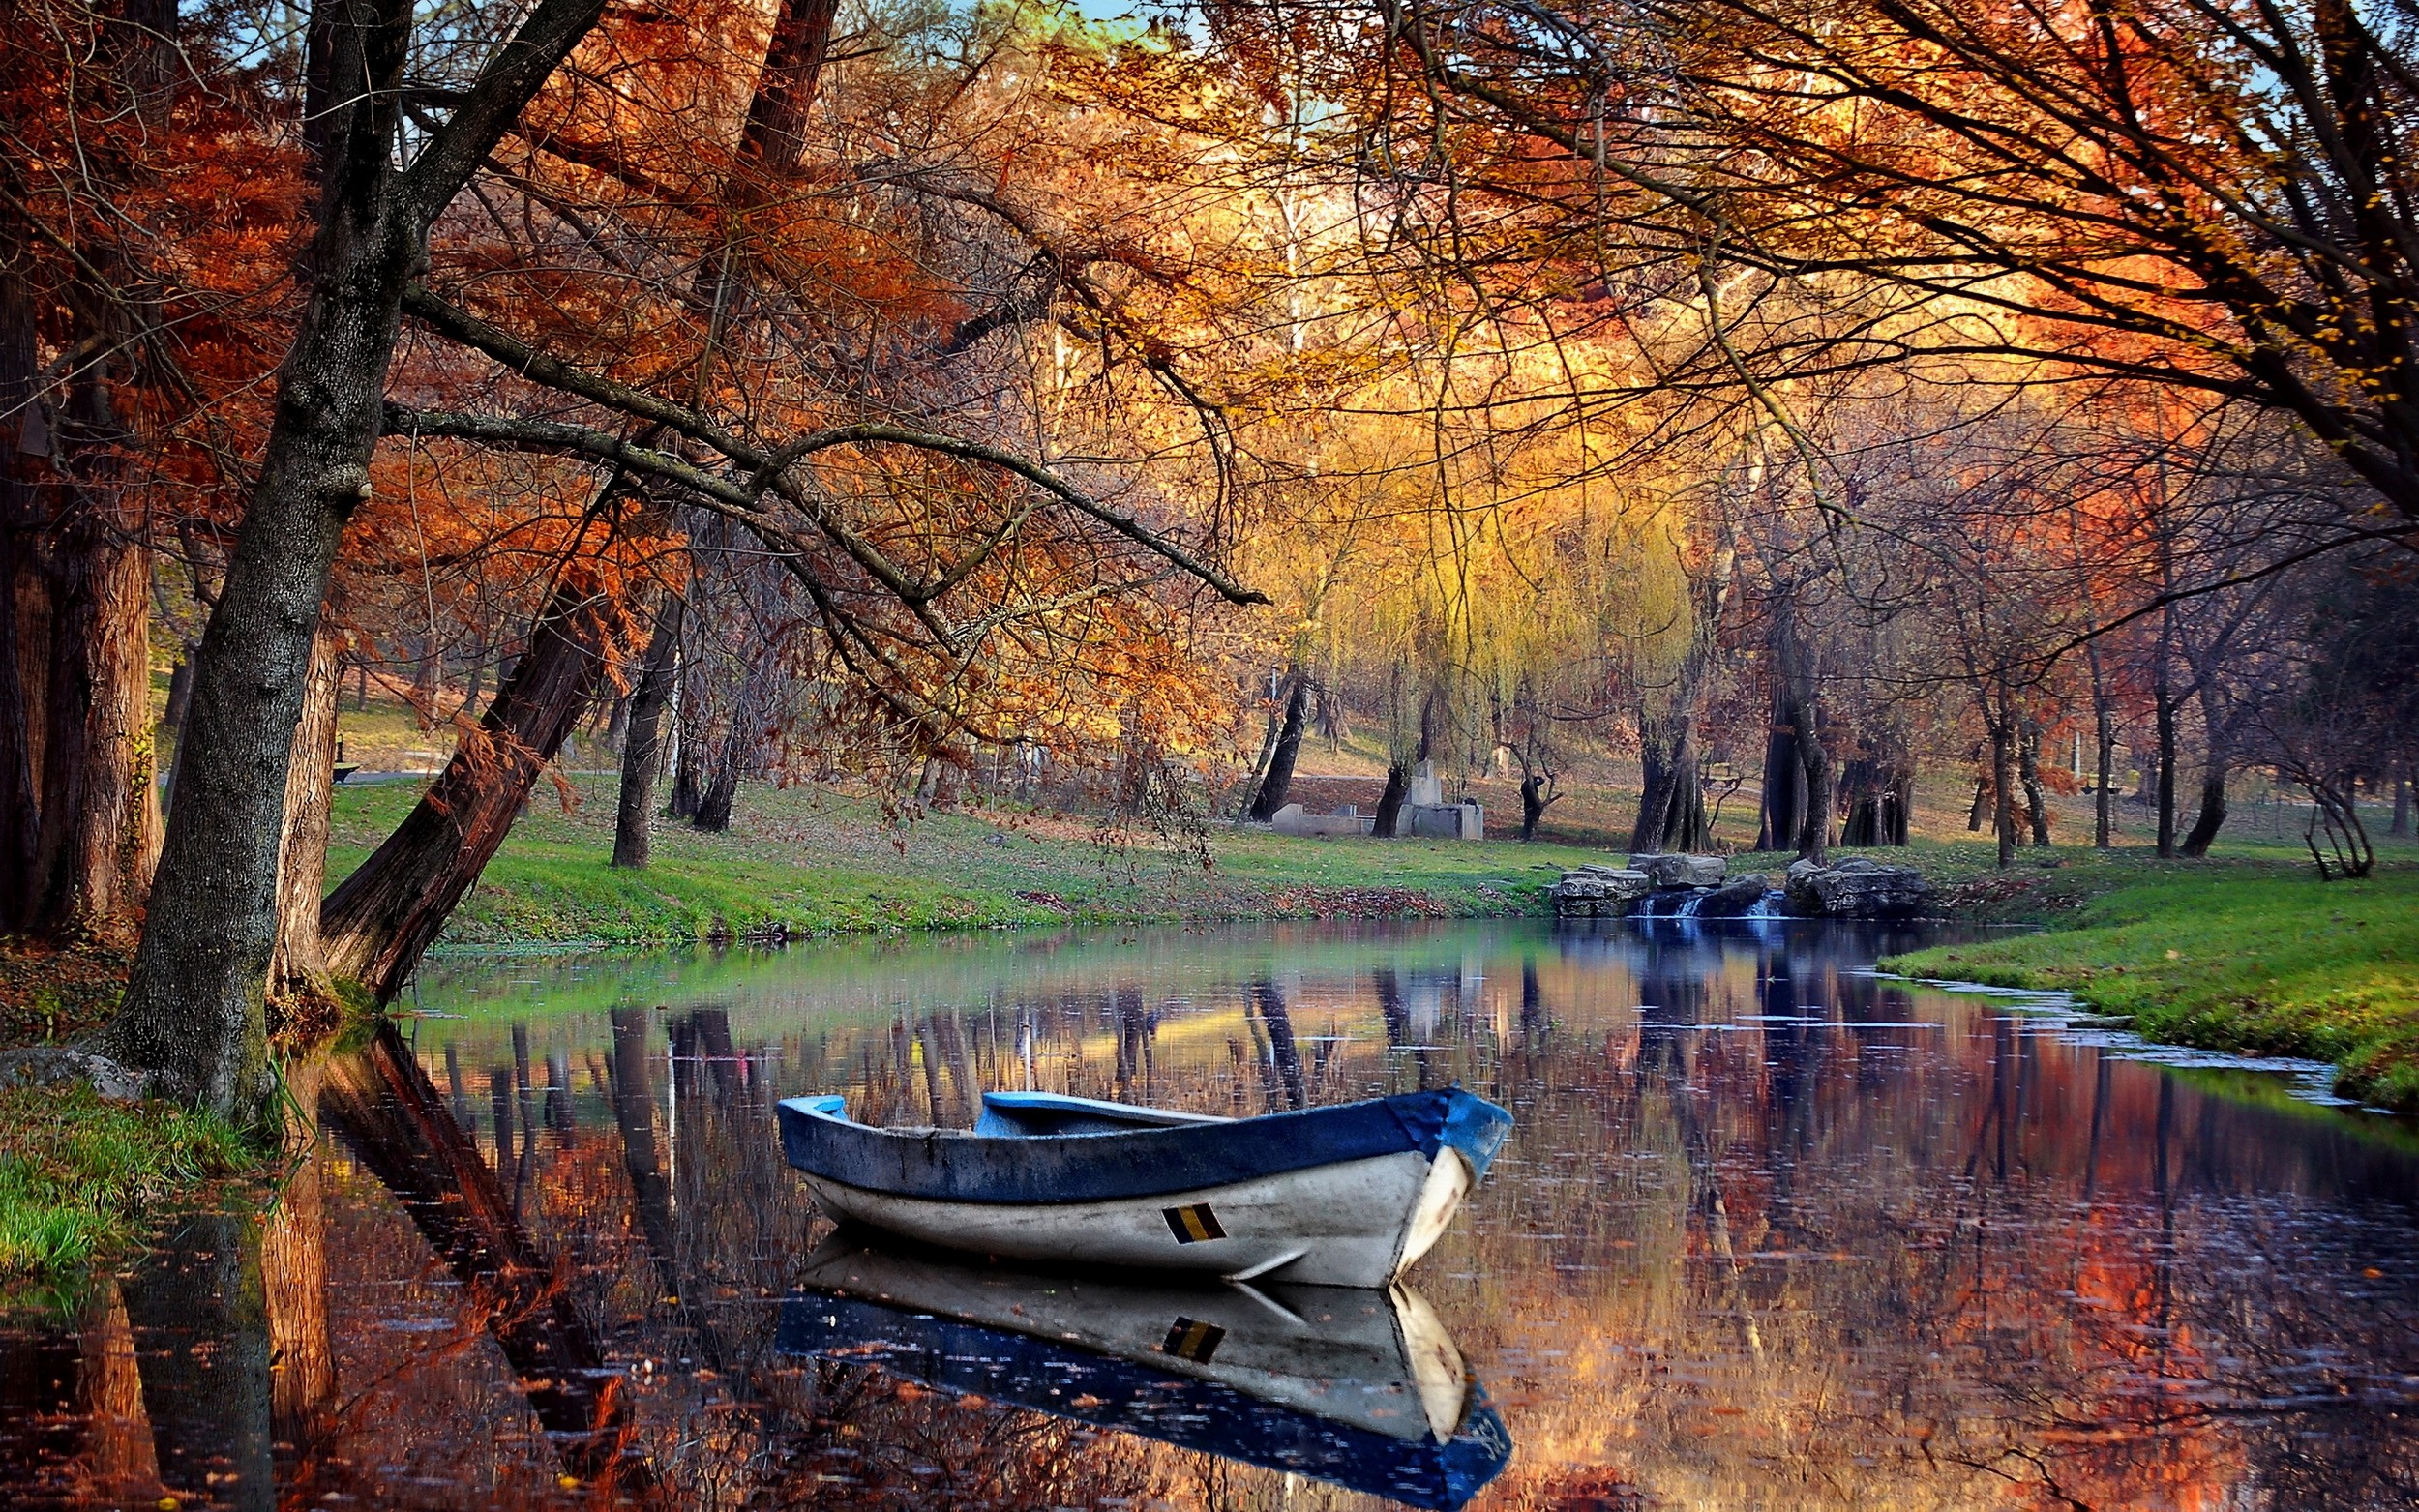 General 2500x1563 fall boat park pond reflection trees nature water grass plants vehicle outdoors